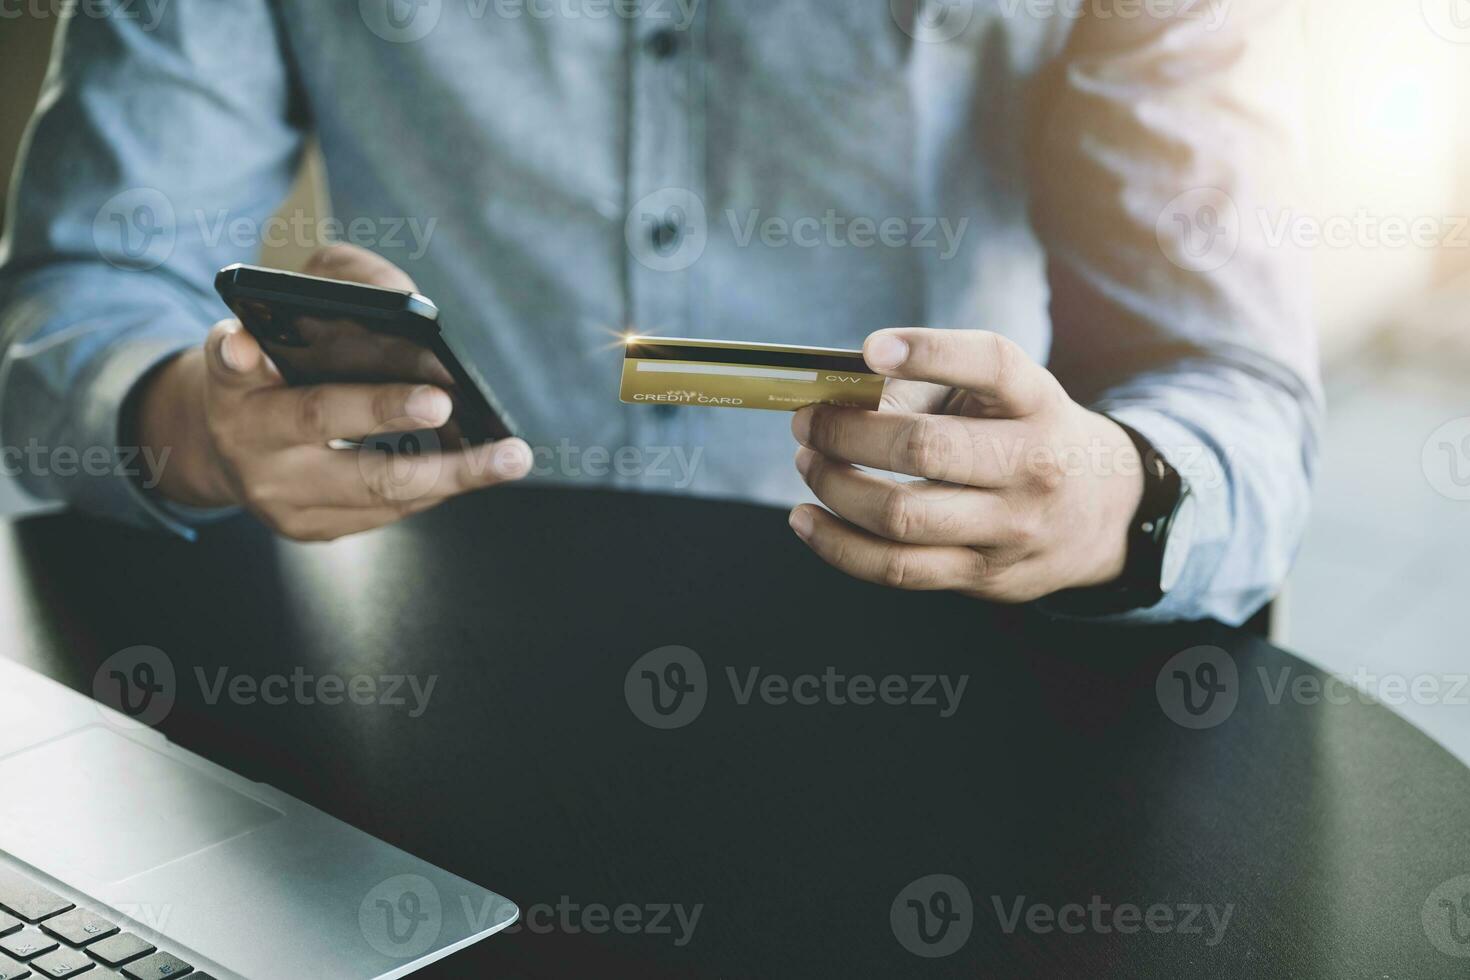 Online Shopping and Internet Payments, Asian man are using their credit card and mobile phone to shop online or conduct errands in the digital world. photo